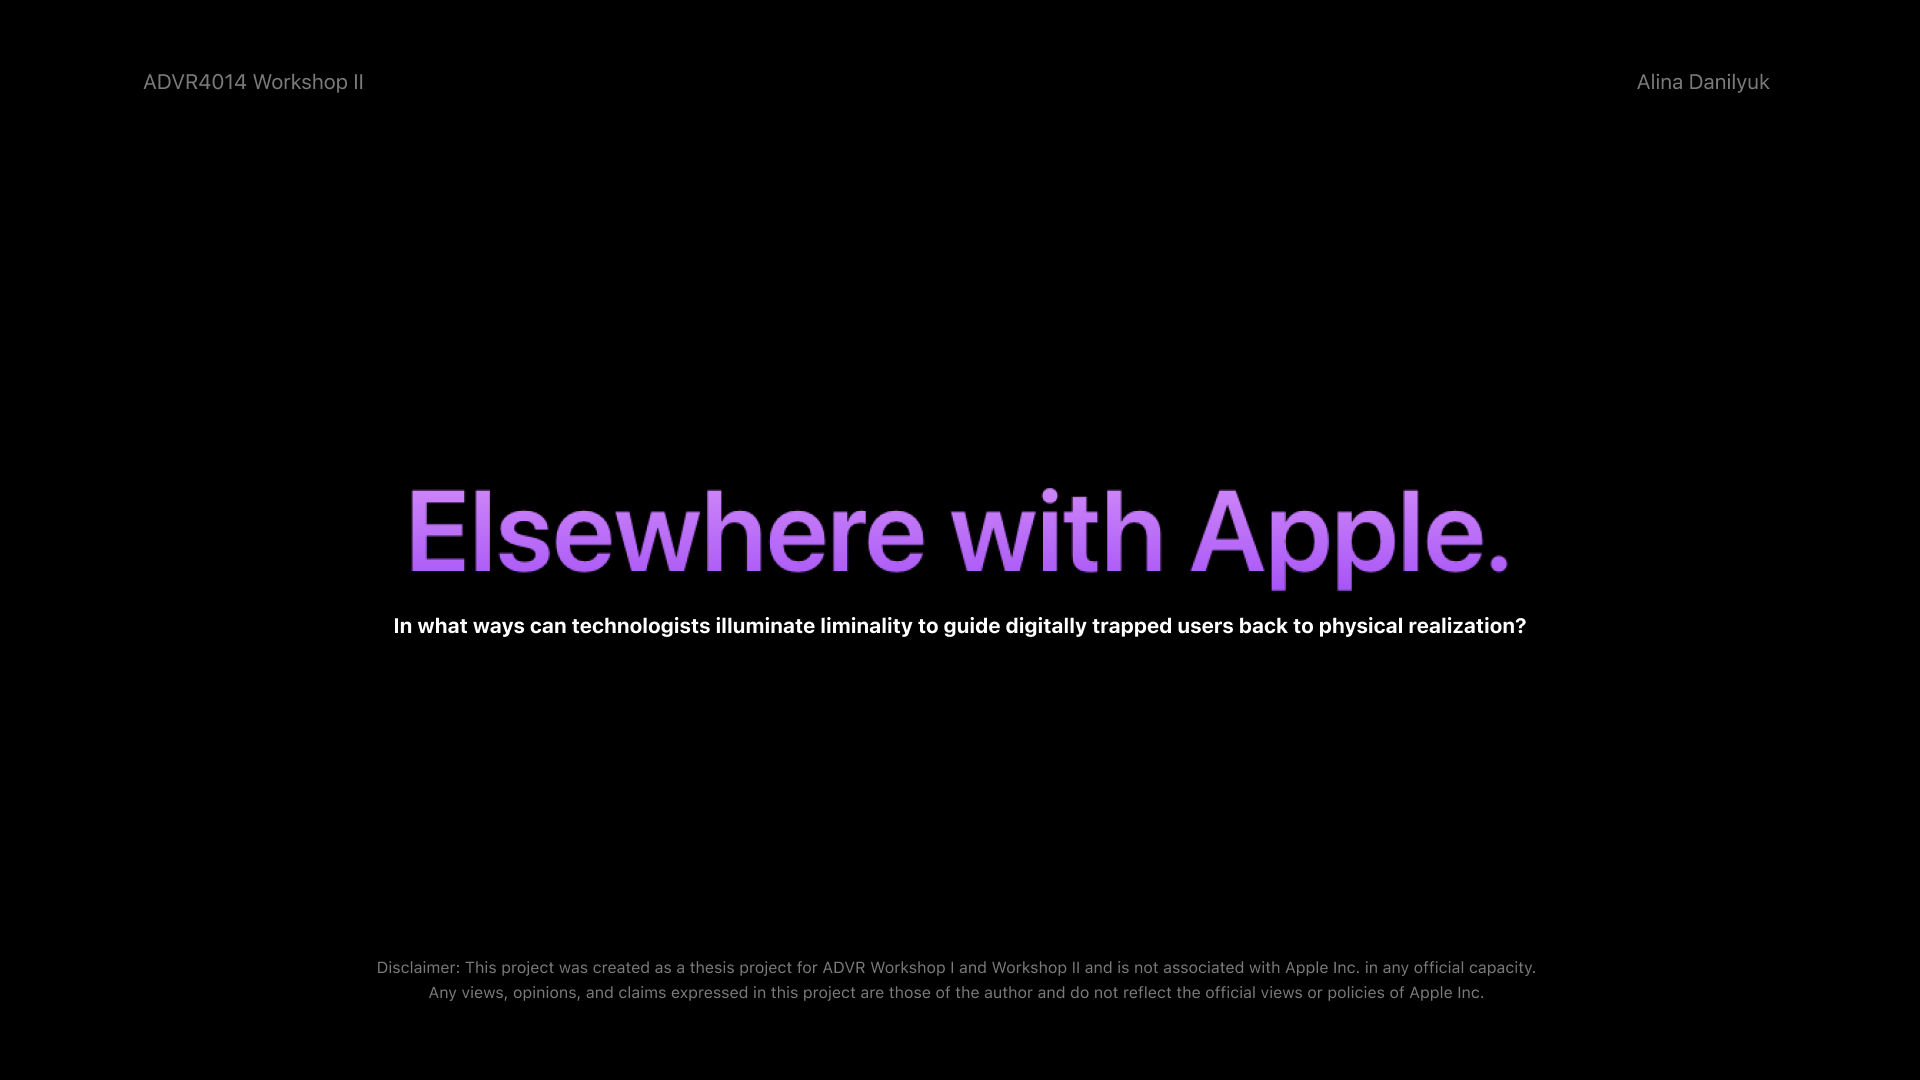 Introducing Elsewhere with Apple. The project is divided into two components: Product (mobile application) and Advertising (this includes the video trailer and the advertising strategy and “Contextually unavailable” campaign).